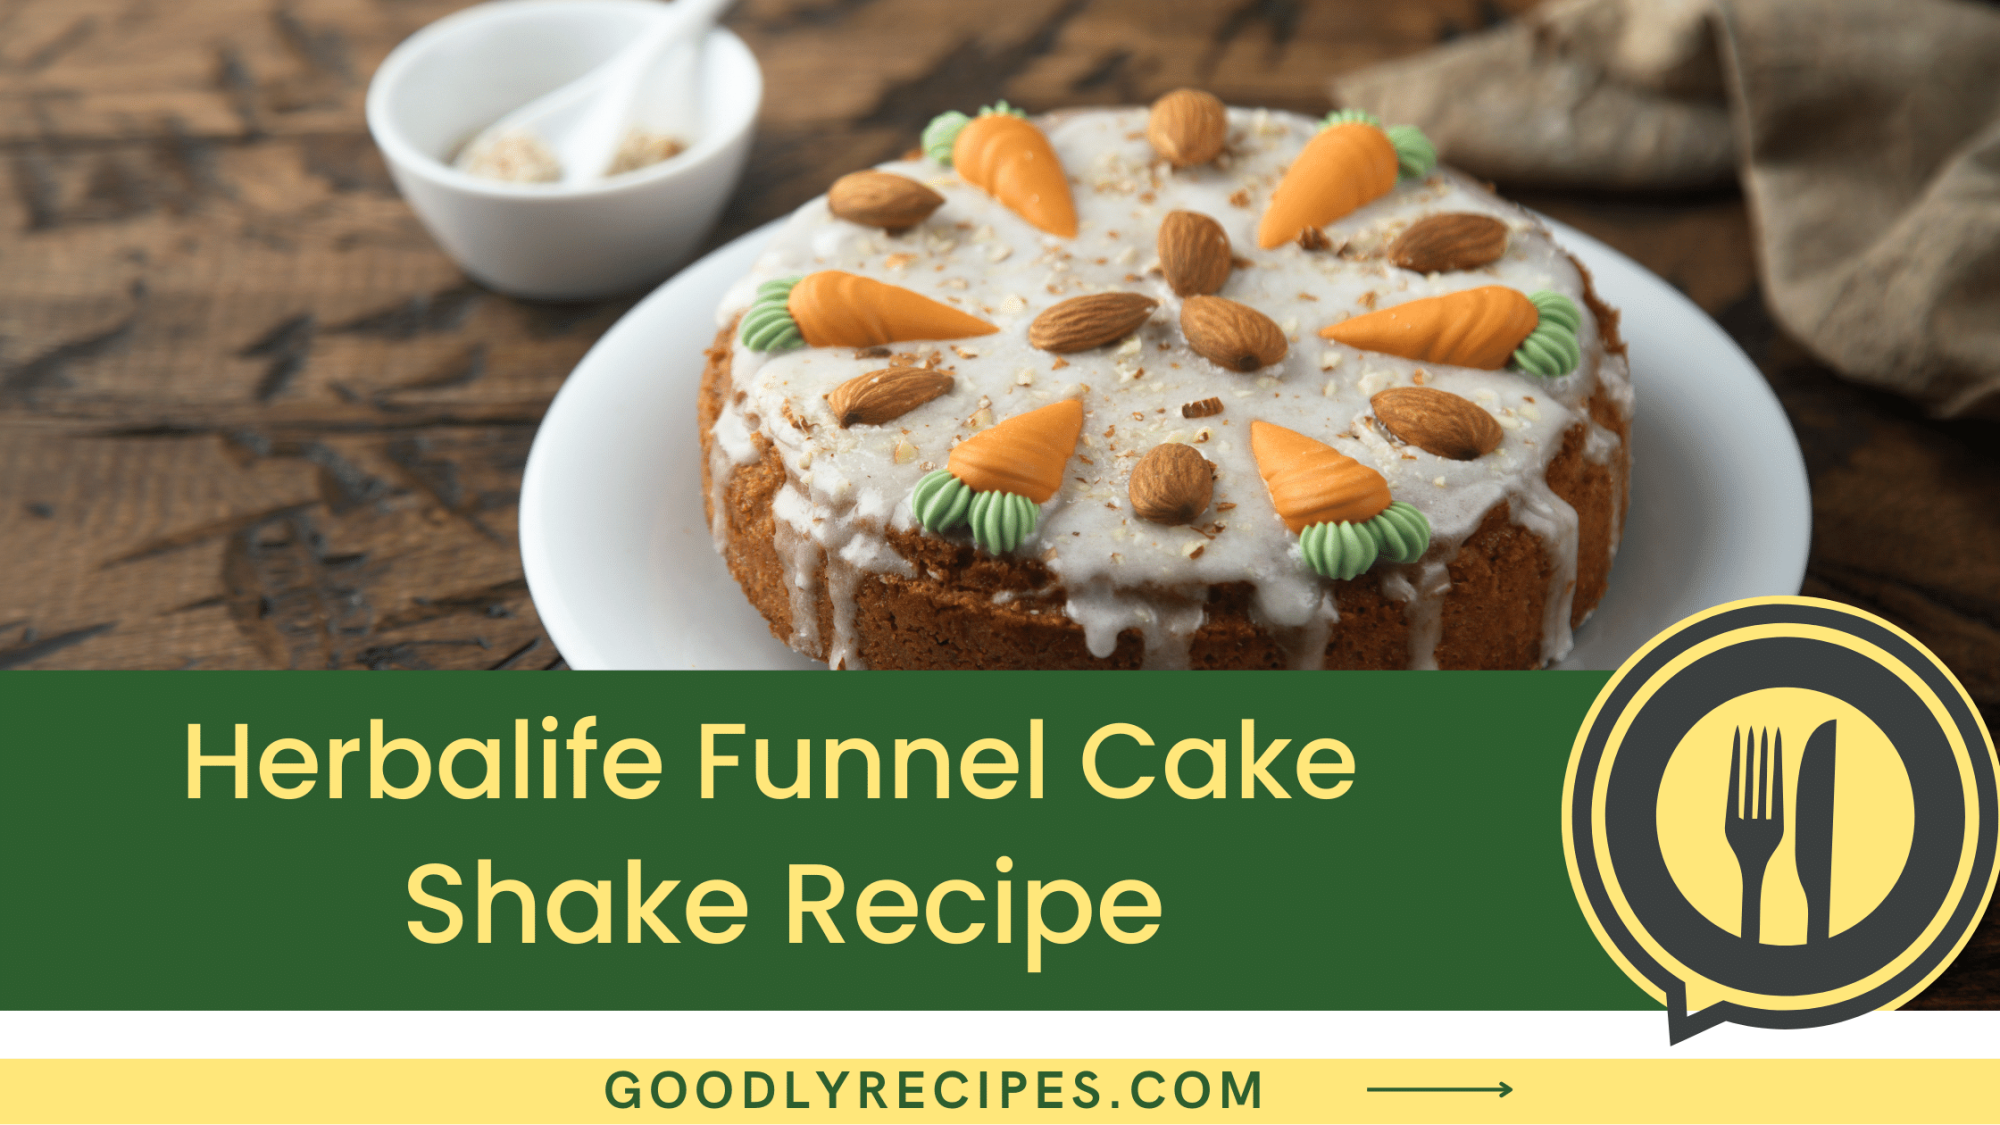 What is Herbalife Funnel Cake Shake?